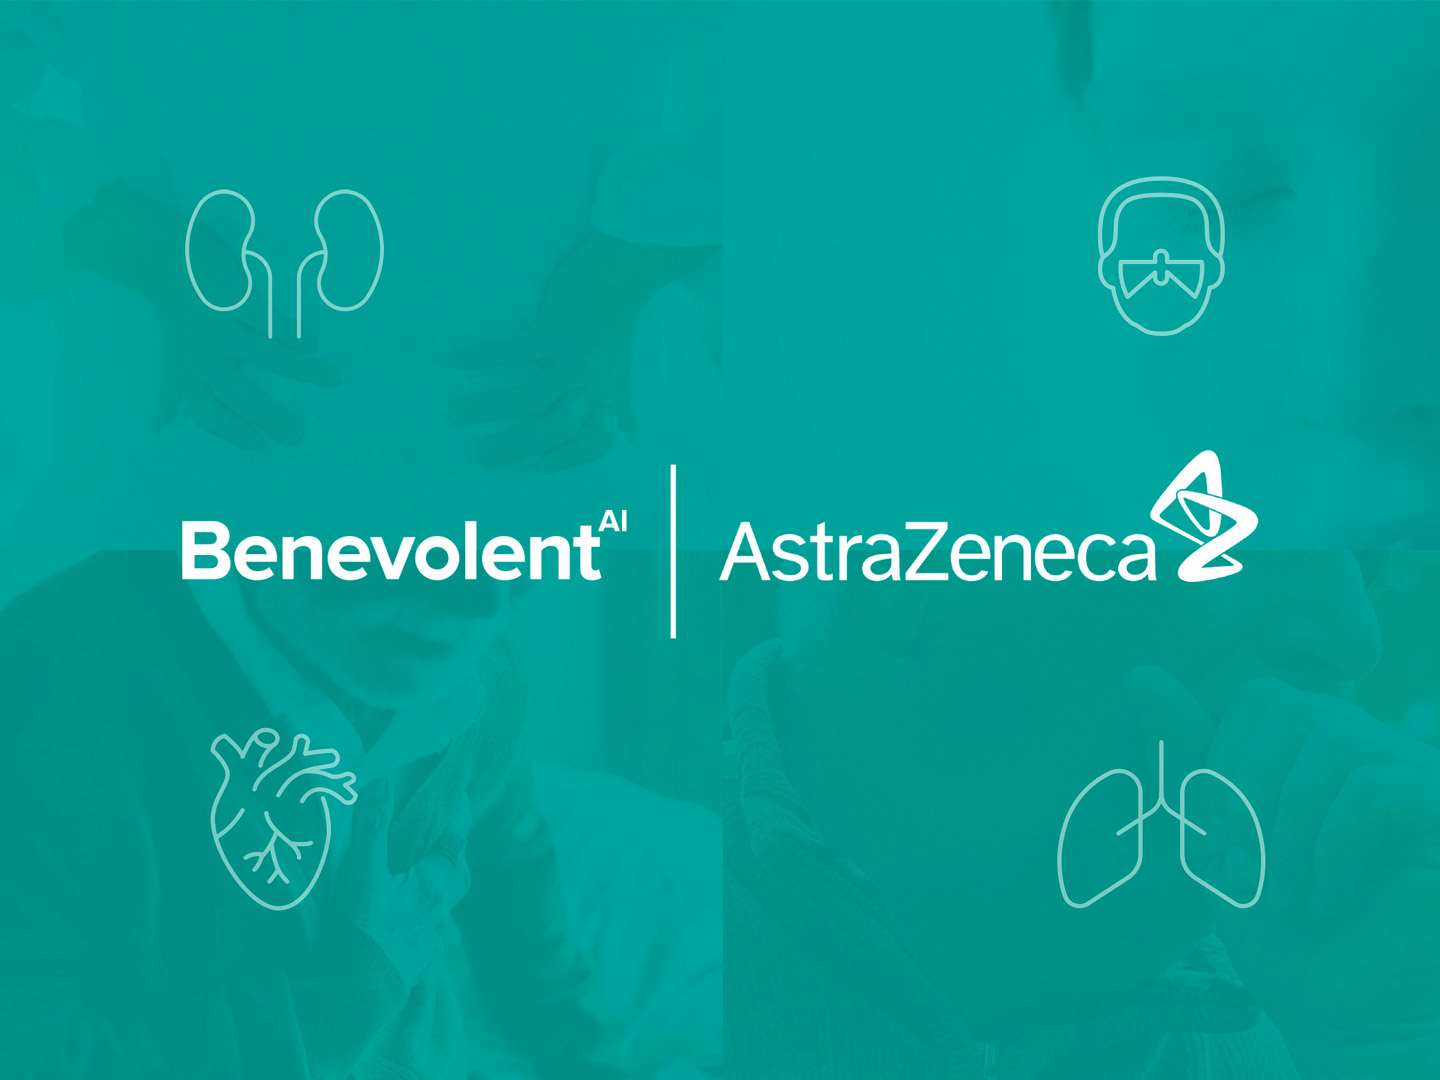 BenevolentAI_announces_3-year_collaboration_expansion_with_AstraZeneca_focused_on_systemic_lupus_erythematosus_and_heart_failure.jpg